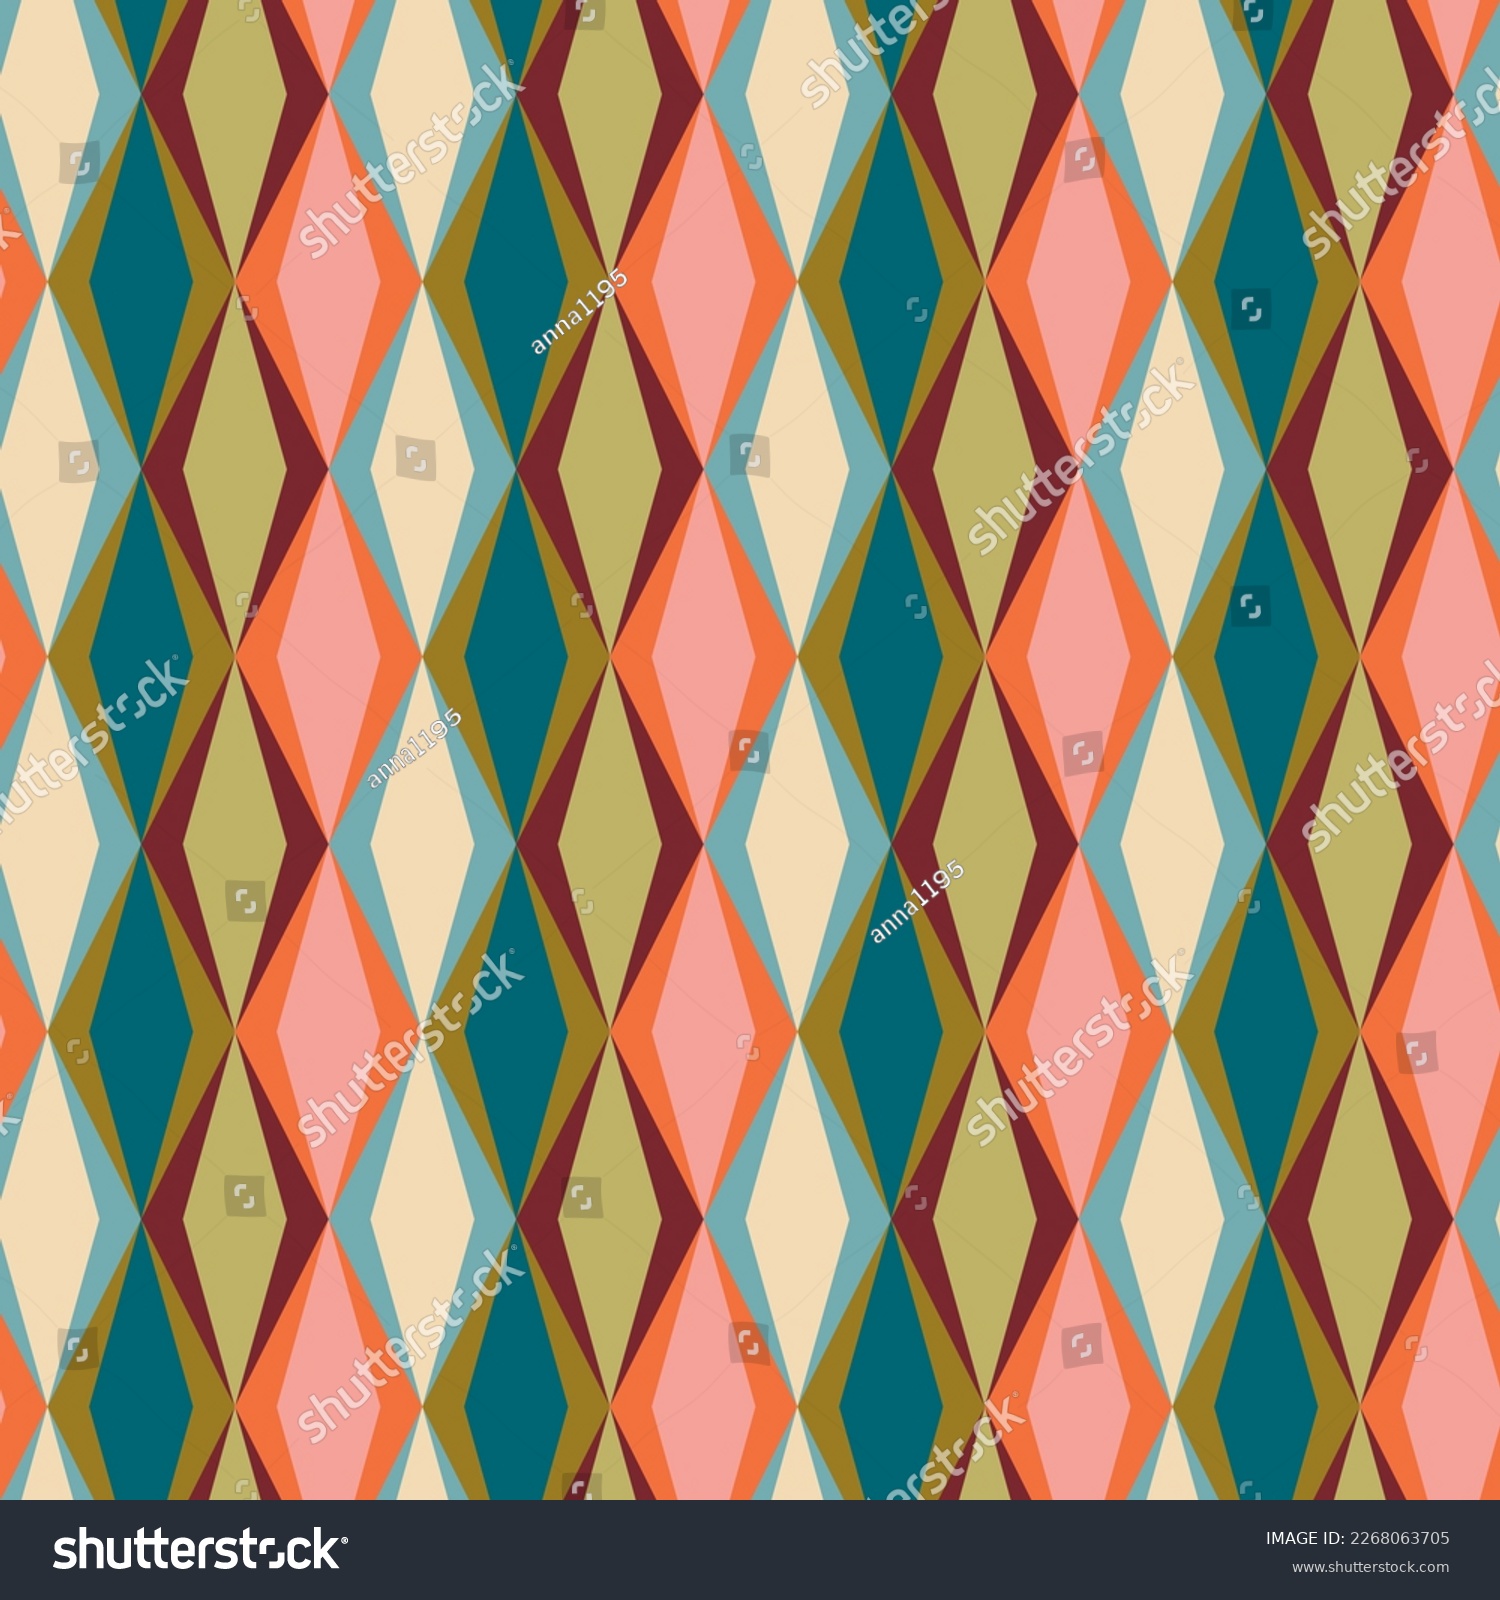 SVG of Aesthetic mid century printable seamless pattern with retro design. Decorative 50`s, 60's, 70's style Vintage modern background in minimalist mid century style for fabric, wallpaper or wrapping svg